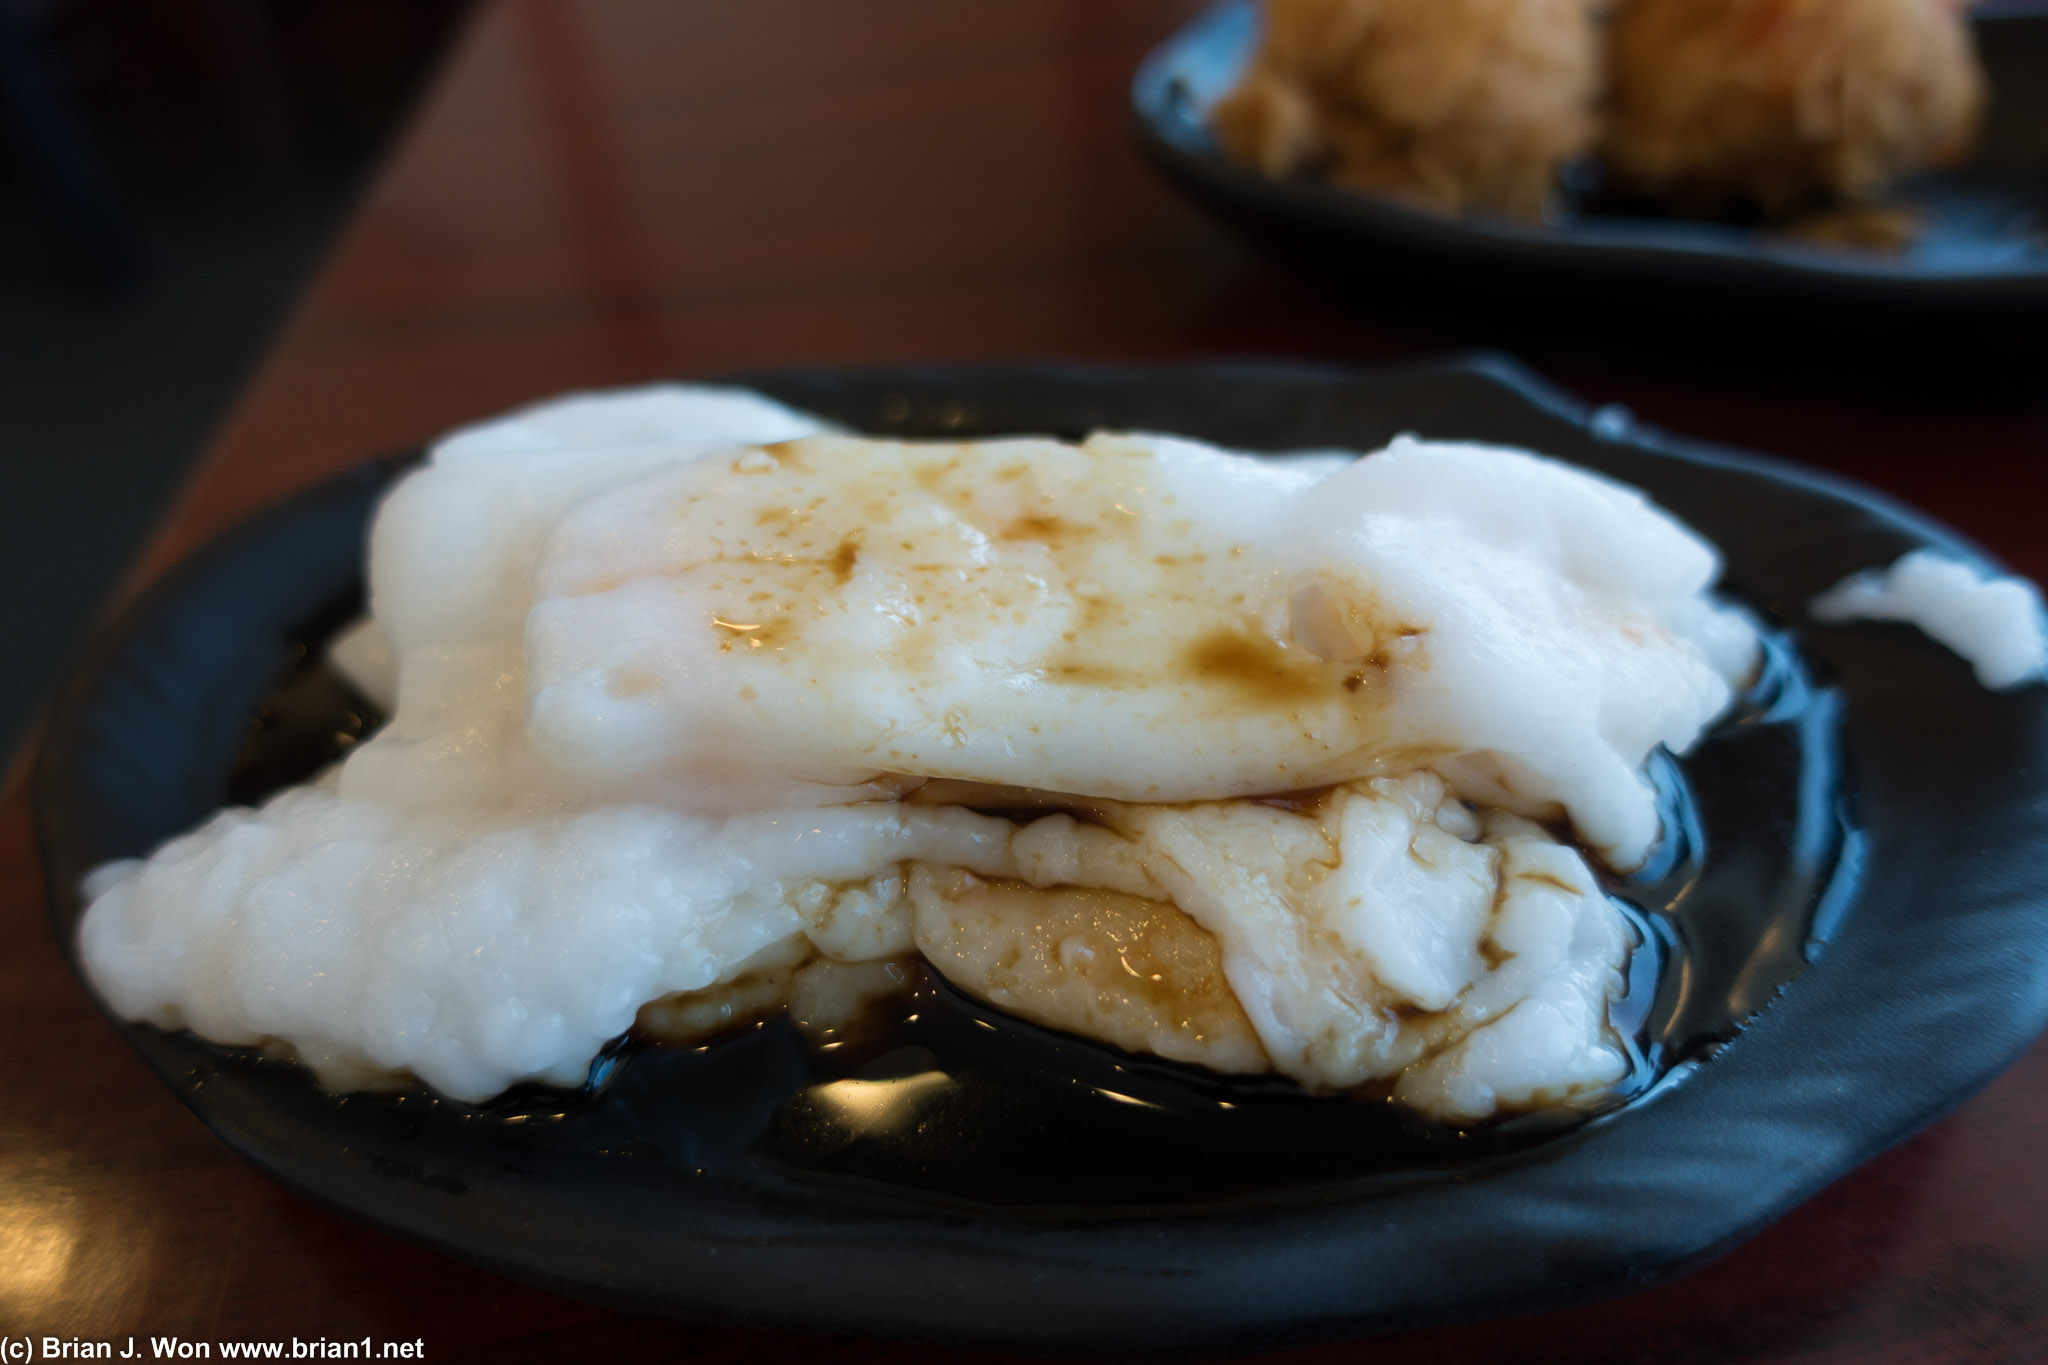 Har cheung fun was pretty terrible. Skins too thick and falling apart, not much flavor.